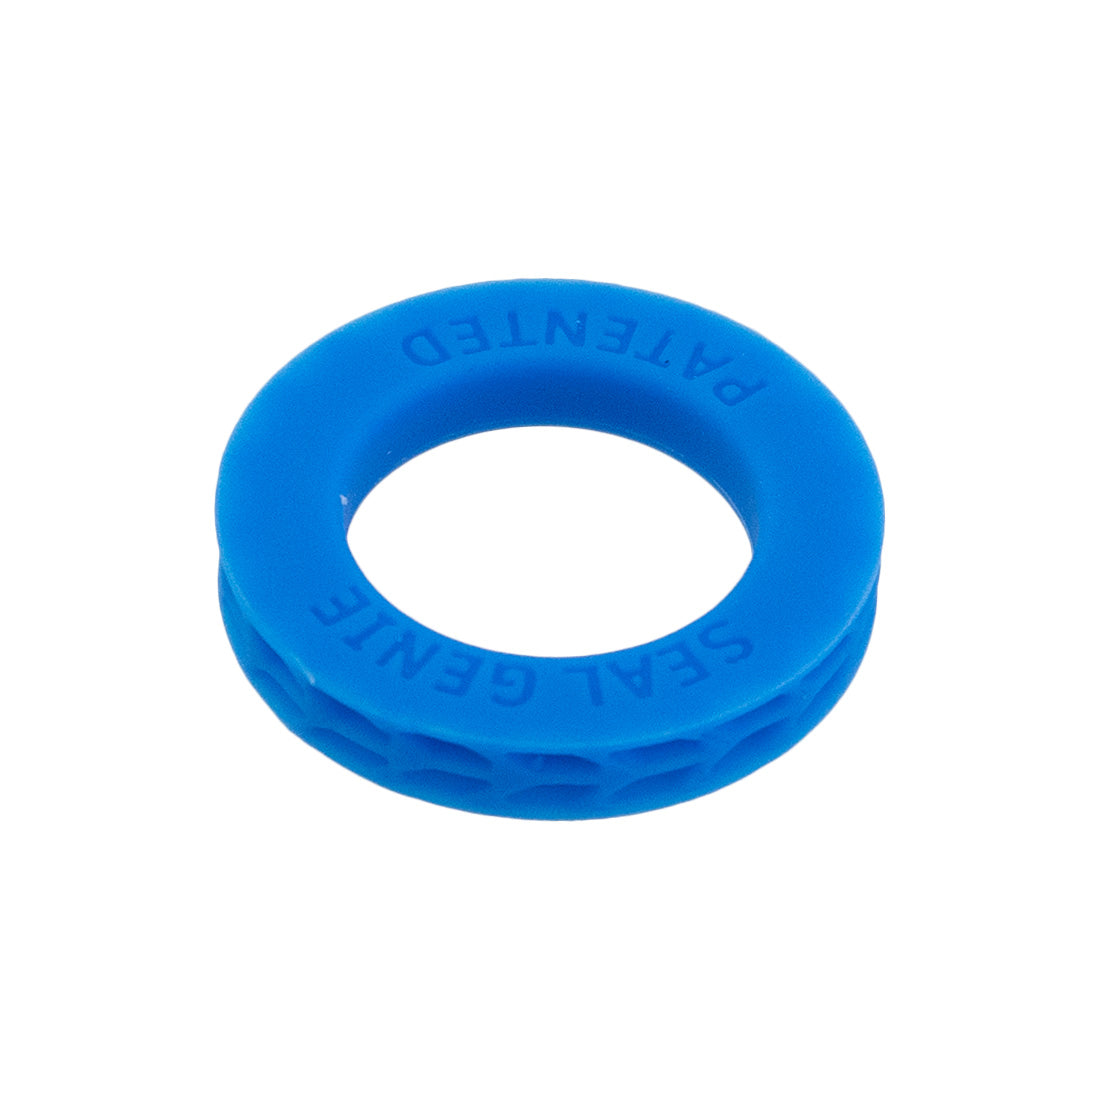 Seal Genie Silicone Hose Washer - Pack of 10 Side Oblique View